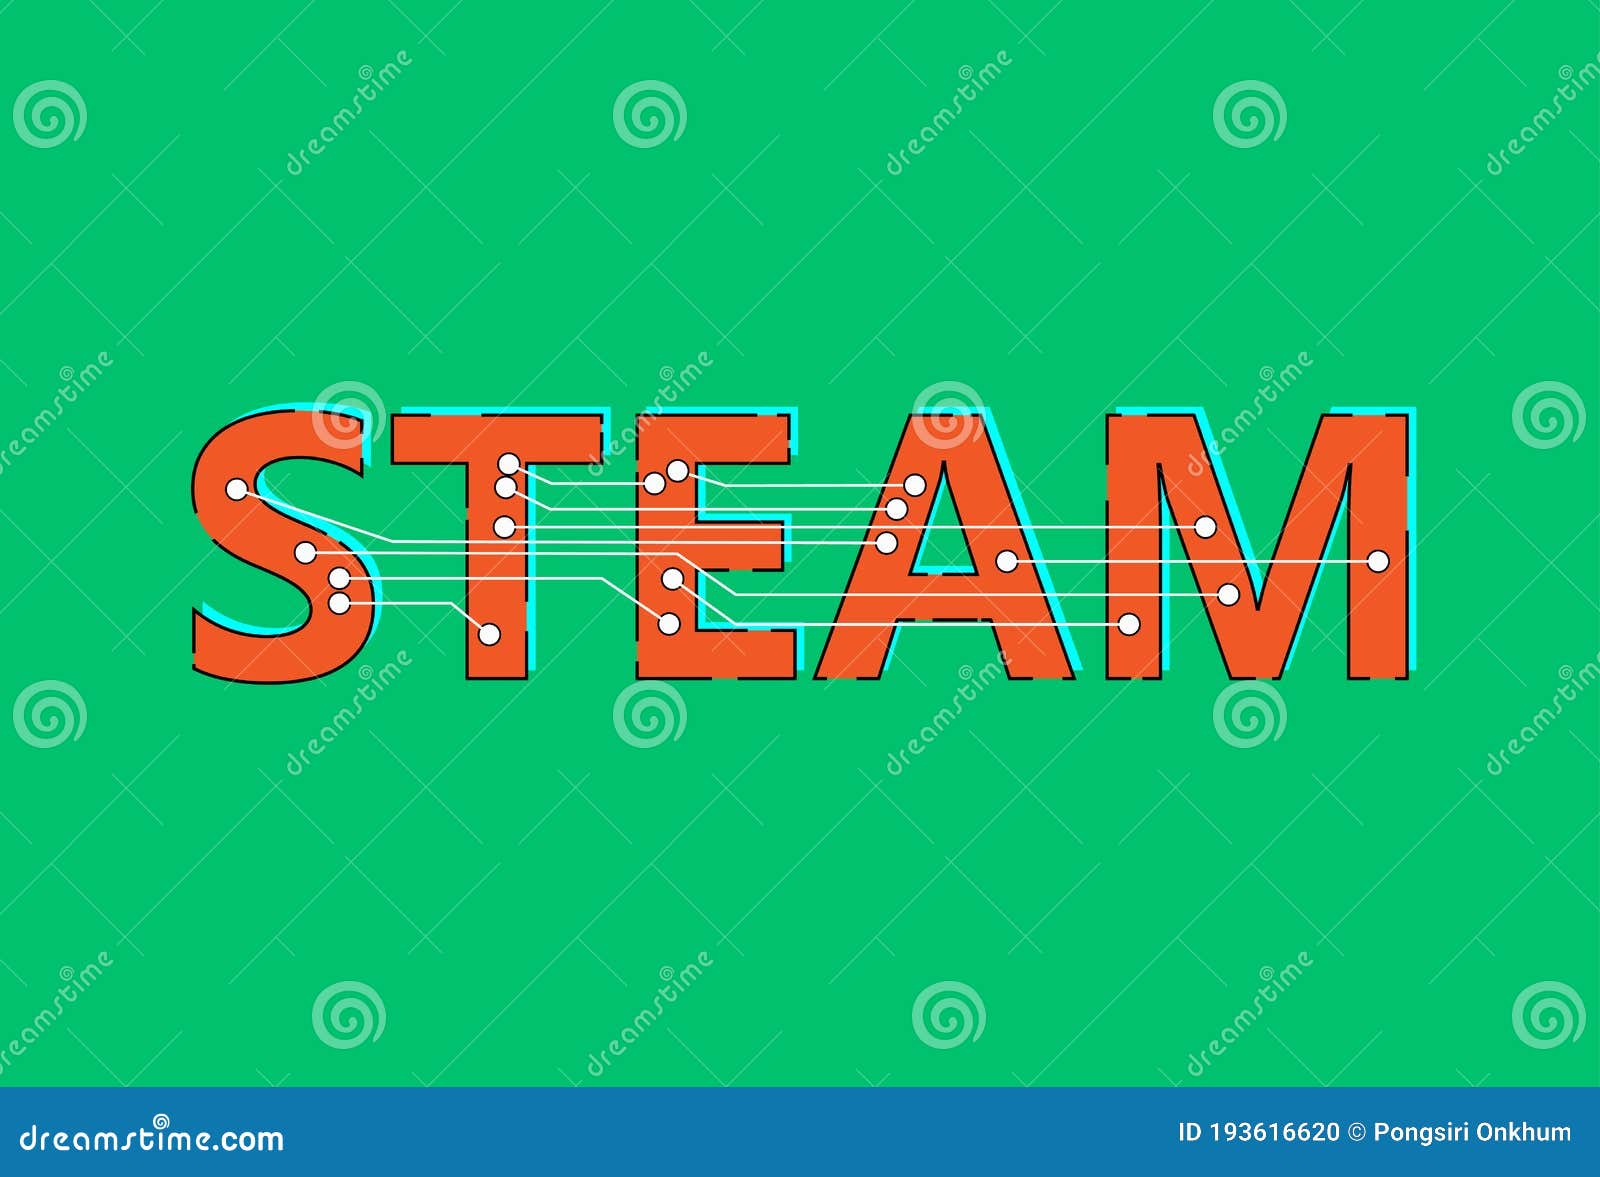 abbreviations steam. linked by electrical circuits